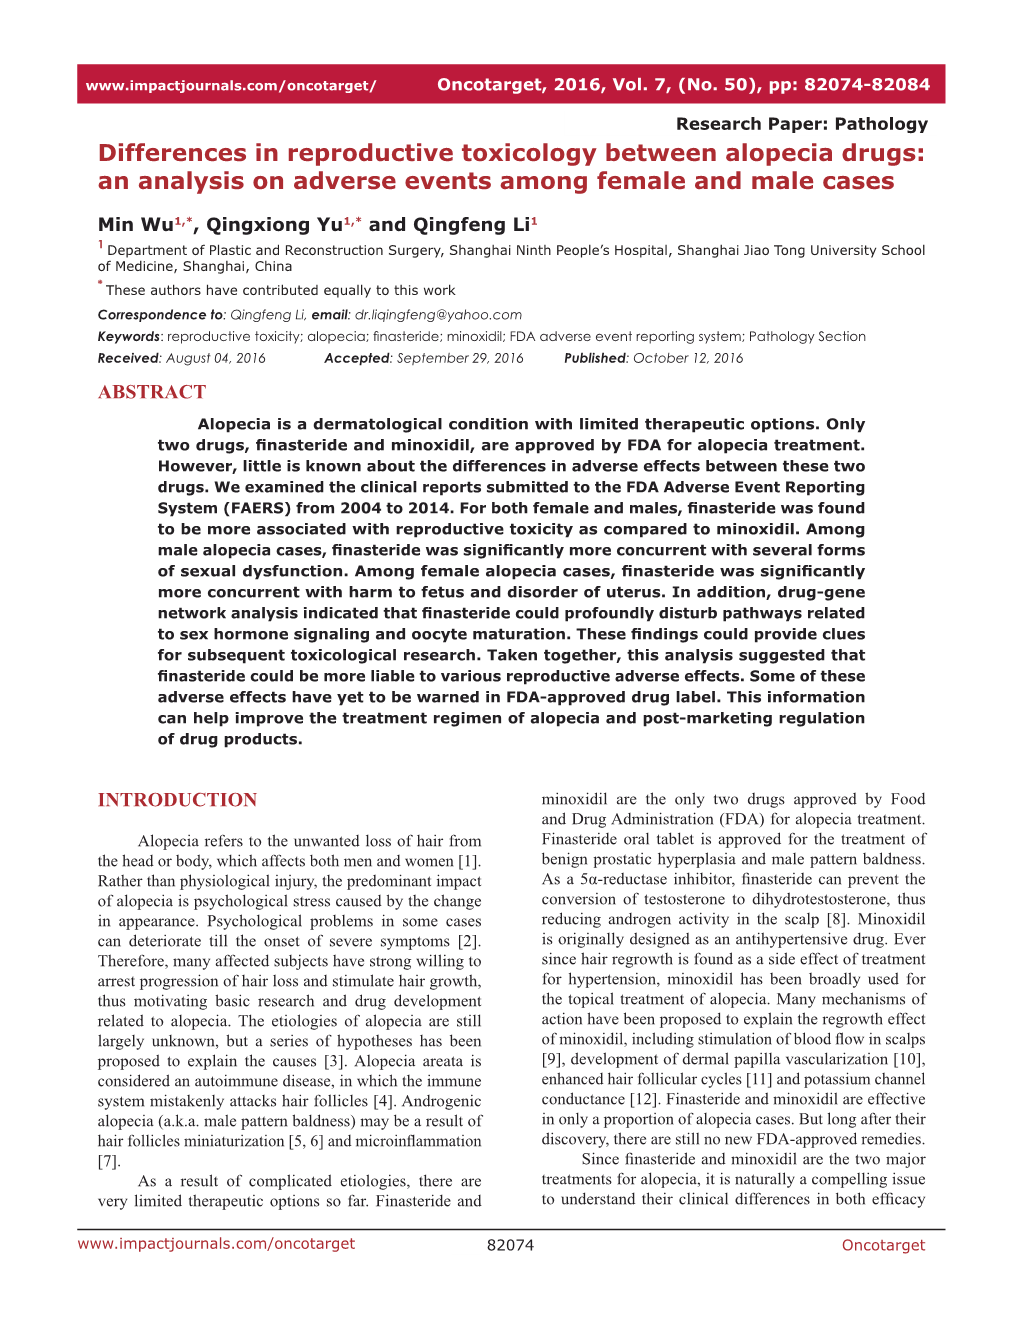 Differences in Reproductive Toxicology Between Alopecia Drugs: an Analysis on Adverse Events Among Female and Male Cases